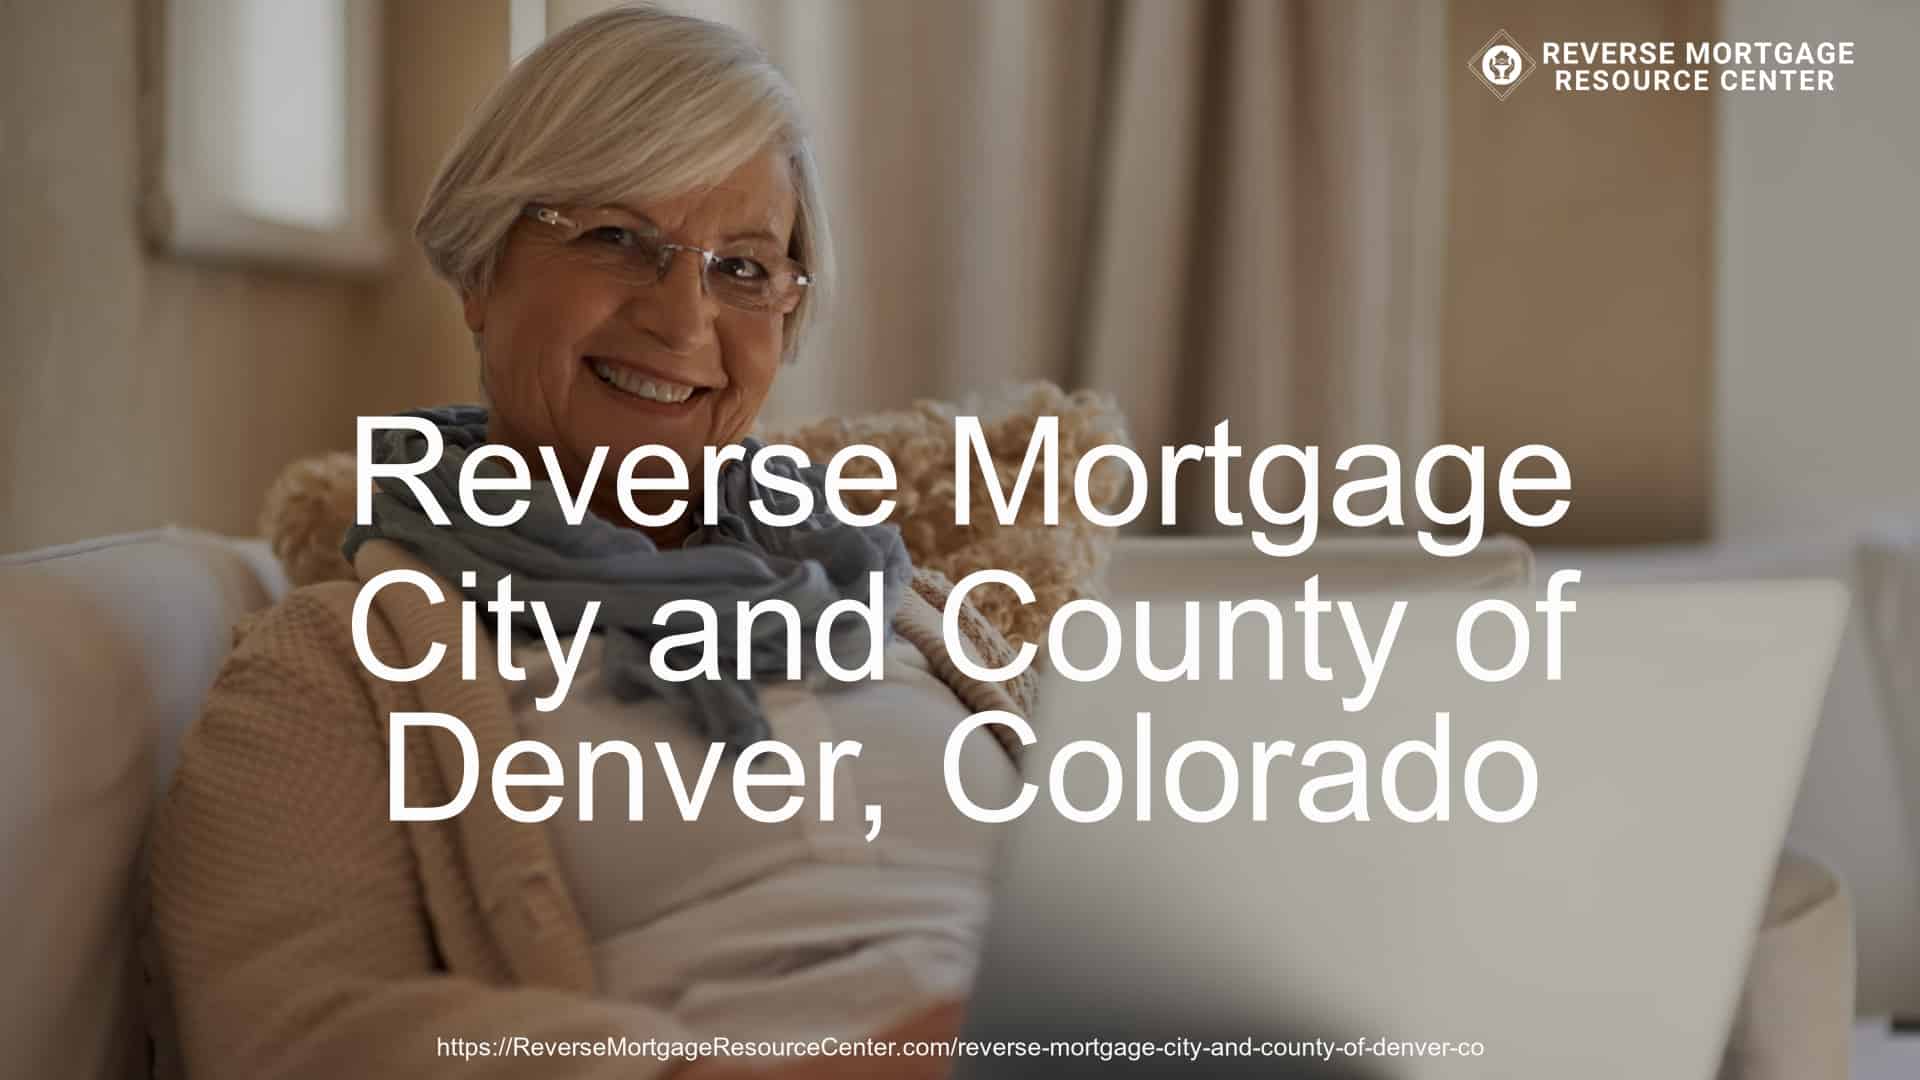 Reverse Mortgage Loans in City and County of Denver Colorado